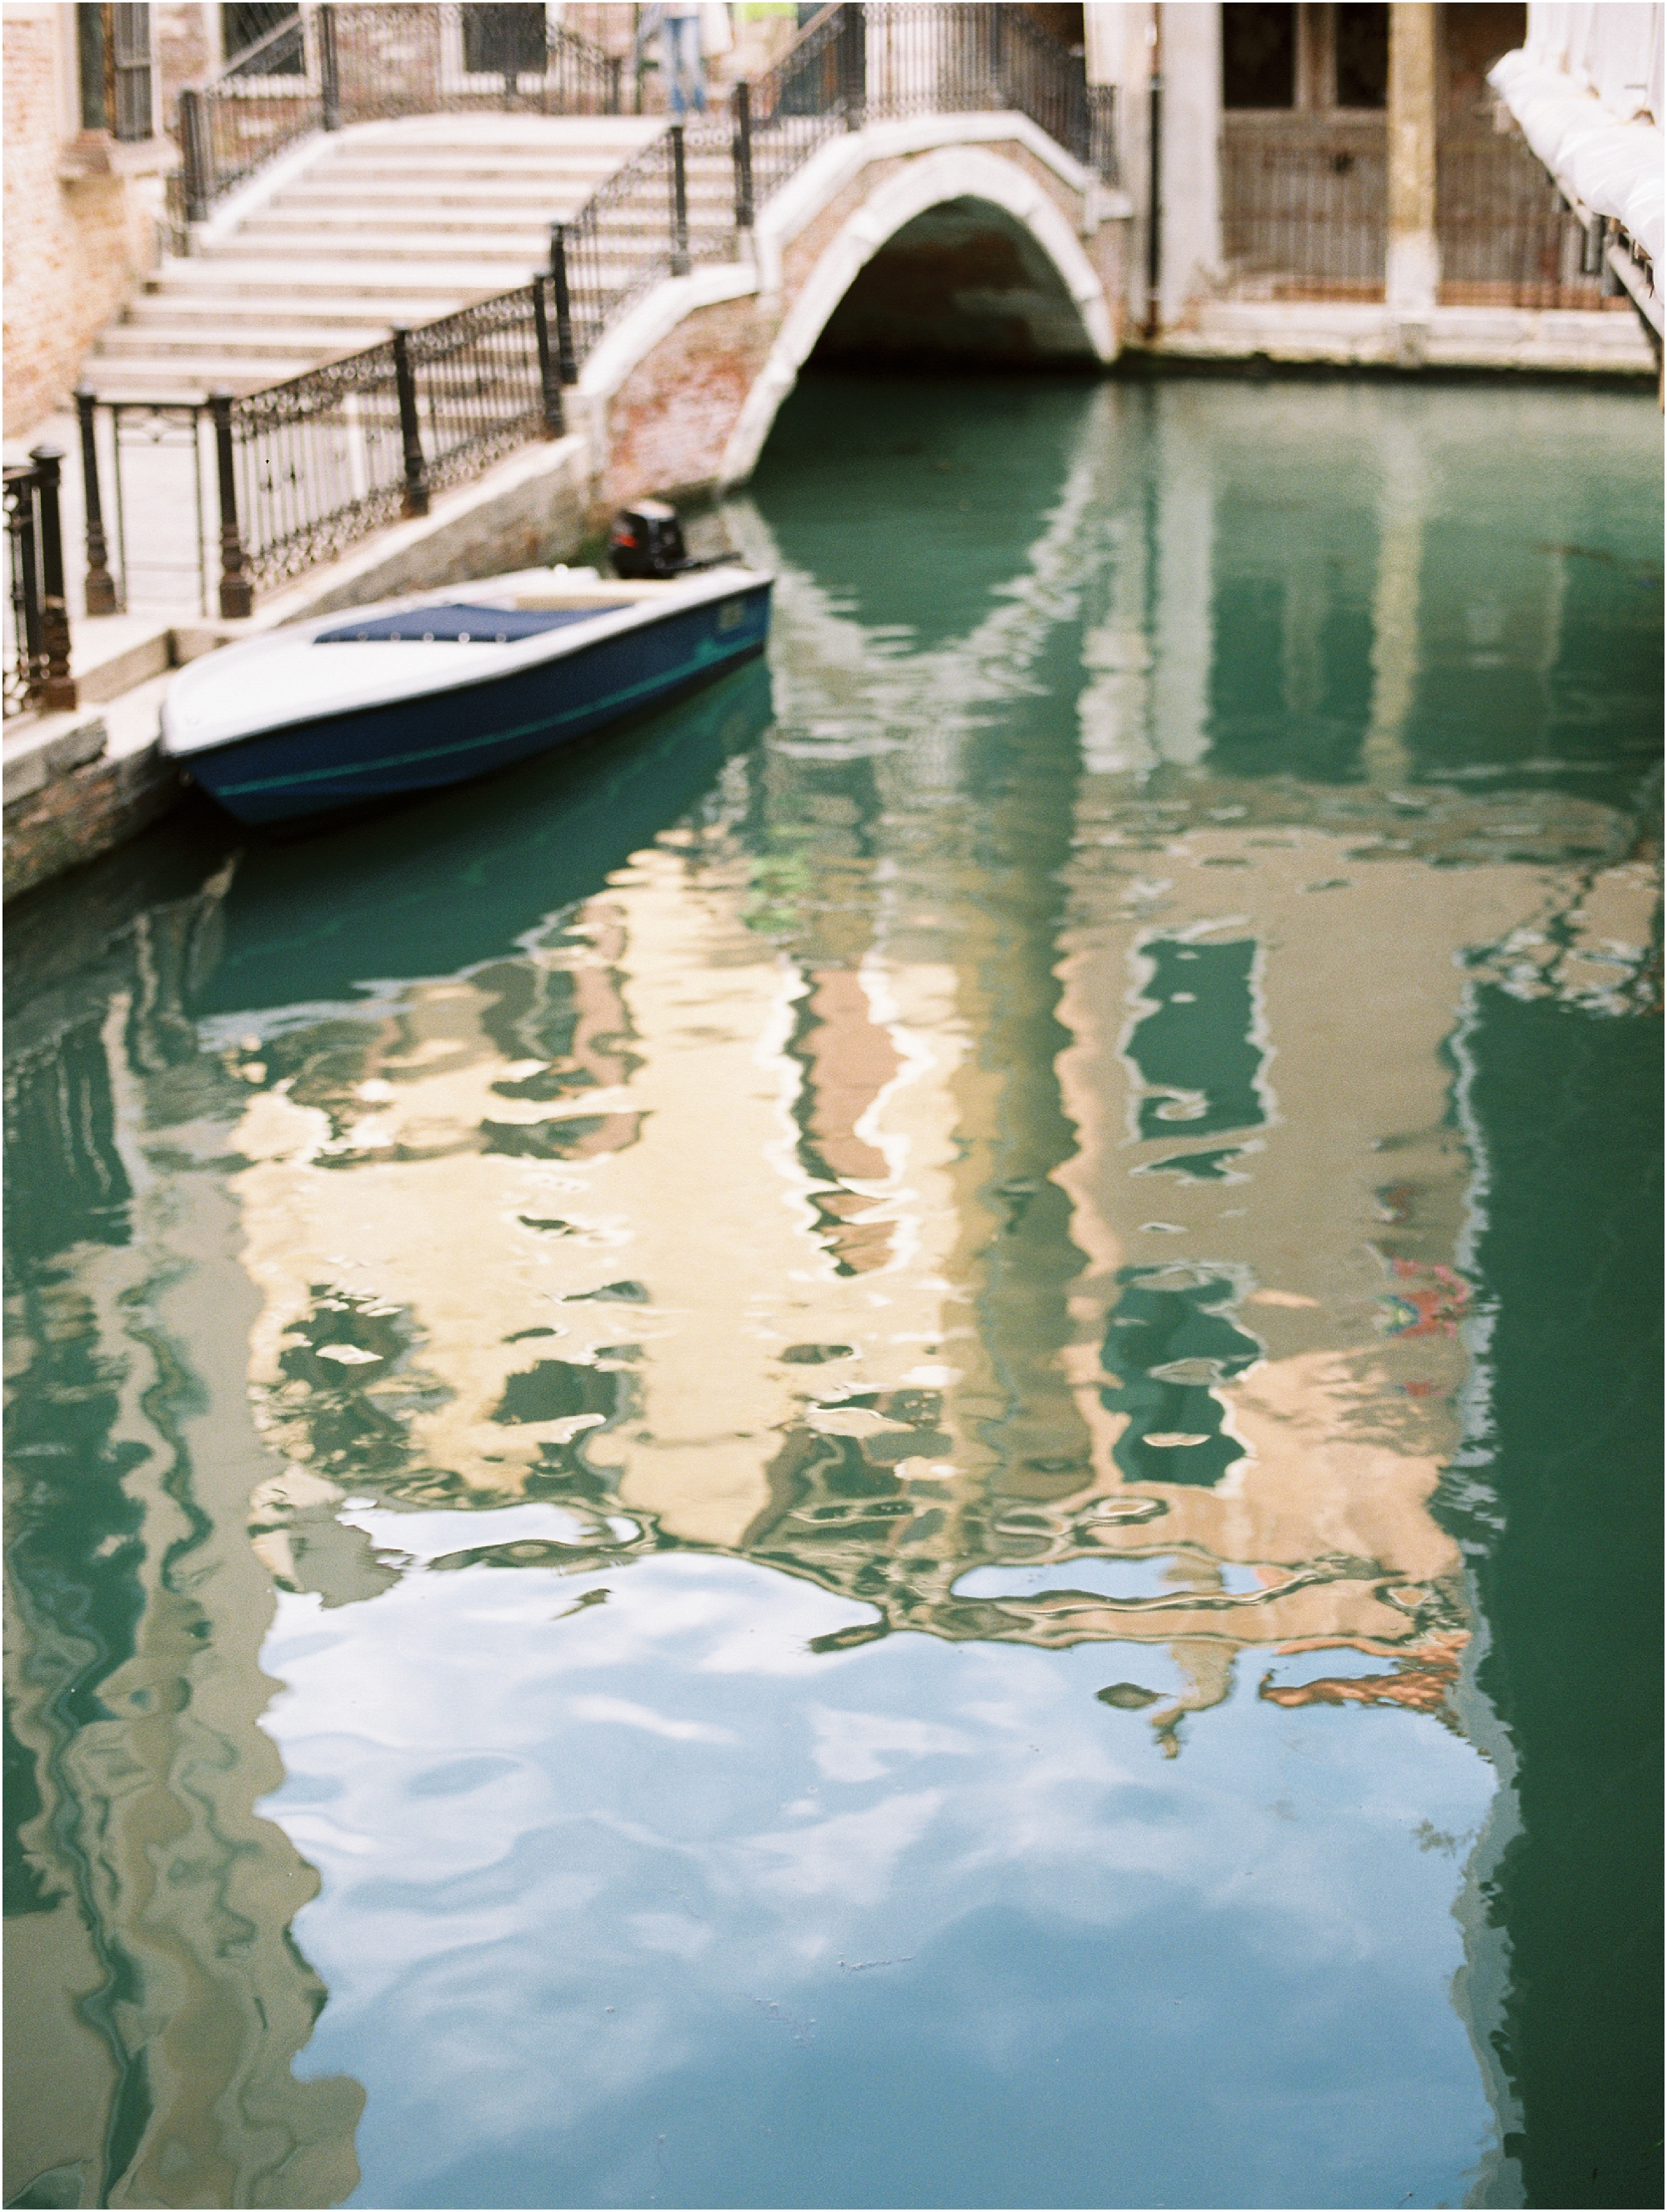 Reflection in water in Venice